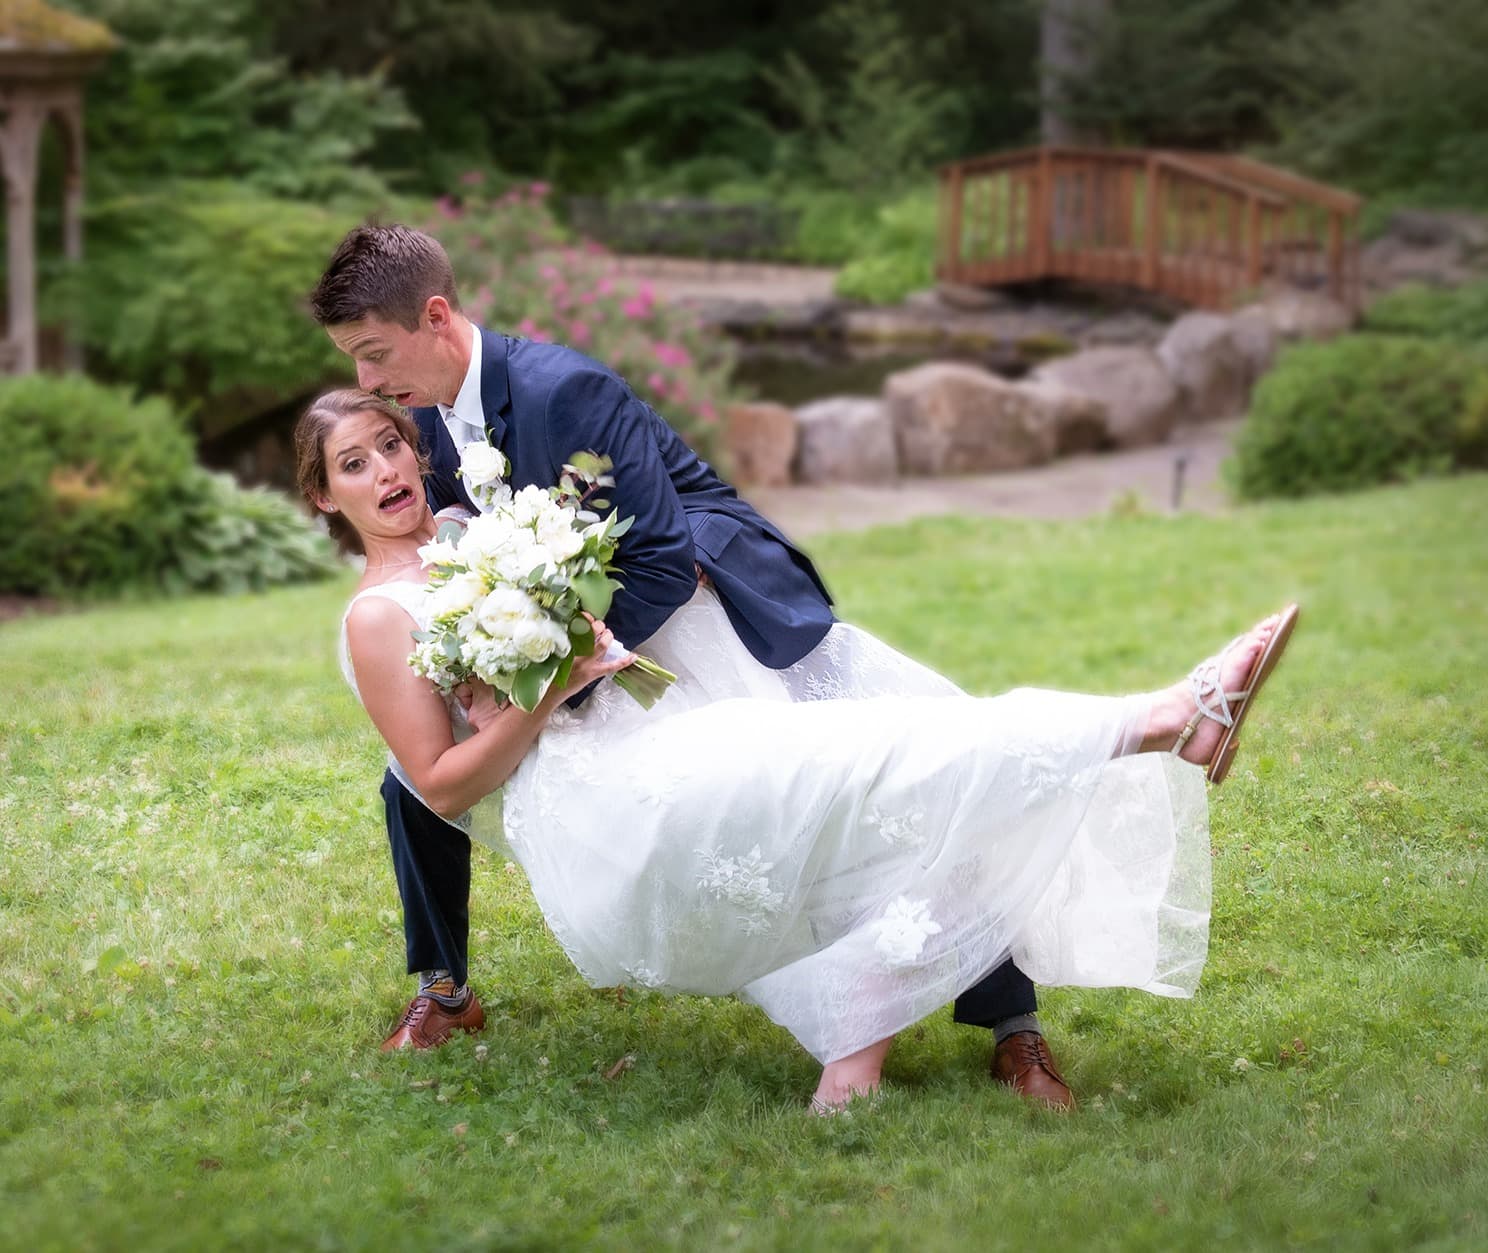 Young couple at wedding pretending to fall